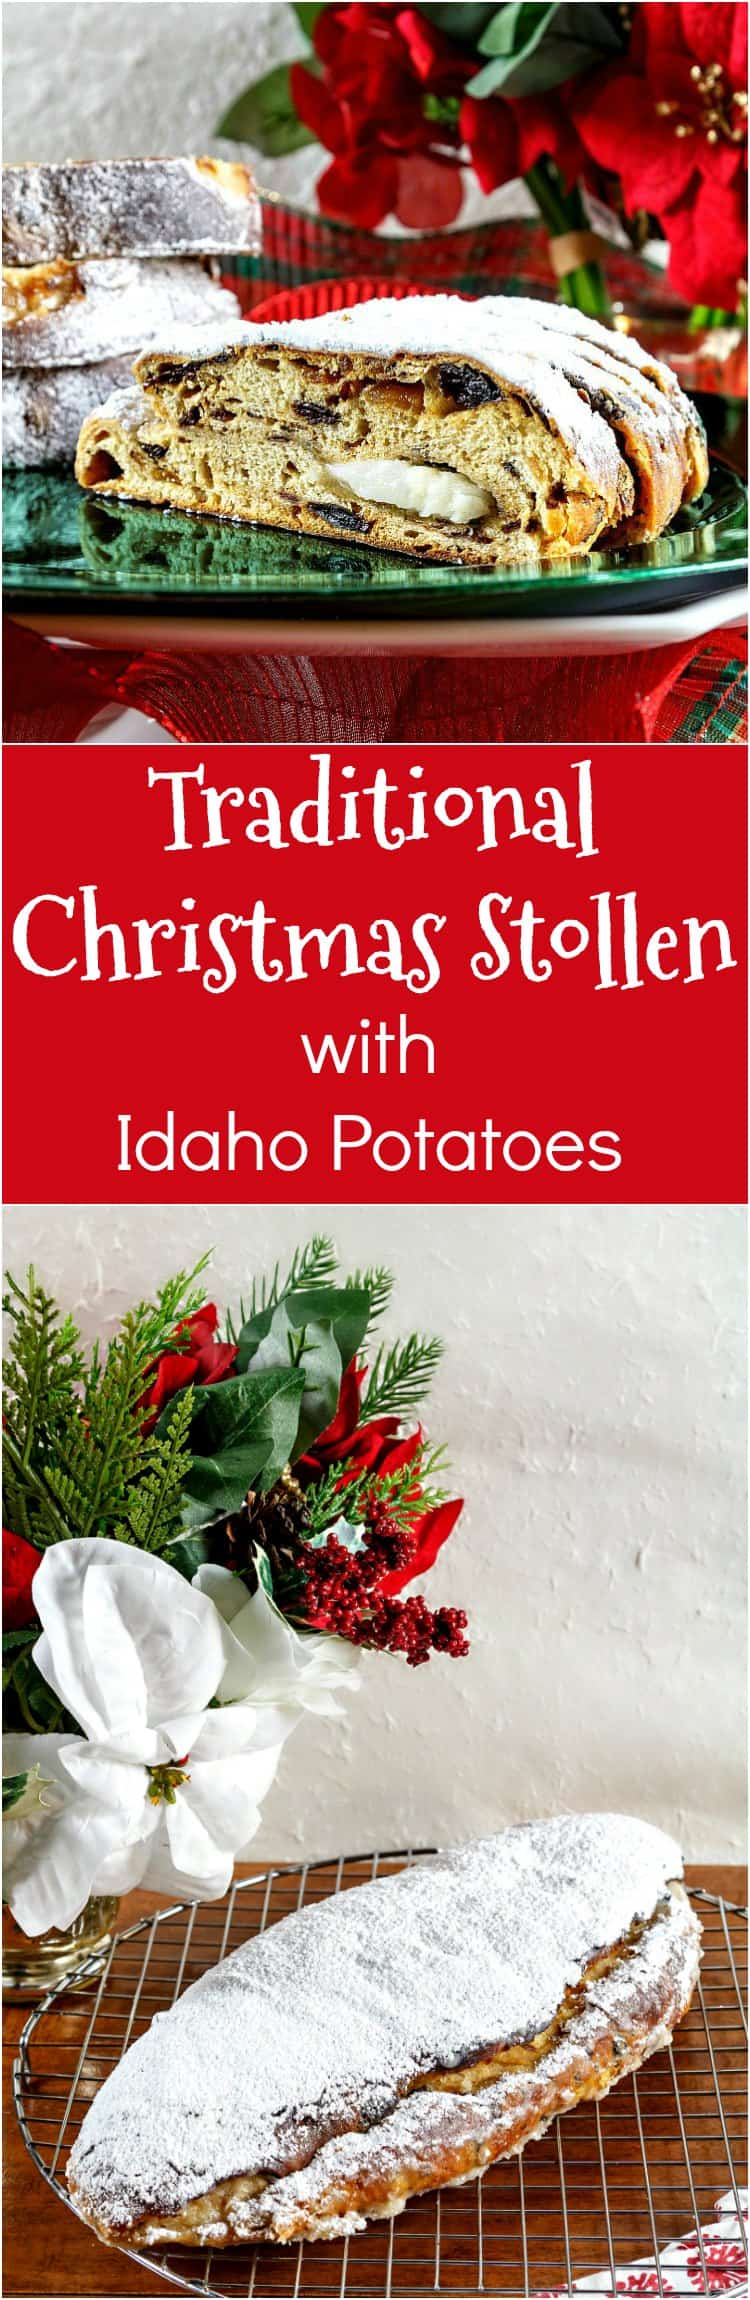 Thanks, Idaho Potato Commission, for partnering with me to make this amazingly flavorful, soft, and delicious traditional Christmas stollen. The mixture of fruits and spices is flavorful but not overpowering, and the potatoes keep the stollen nice and fresh for days. If you're looking for a great stollen recipe, your search is over! Enjoy! | pastrychefonline.com